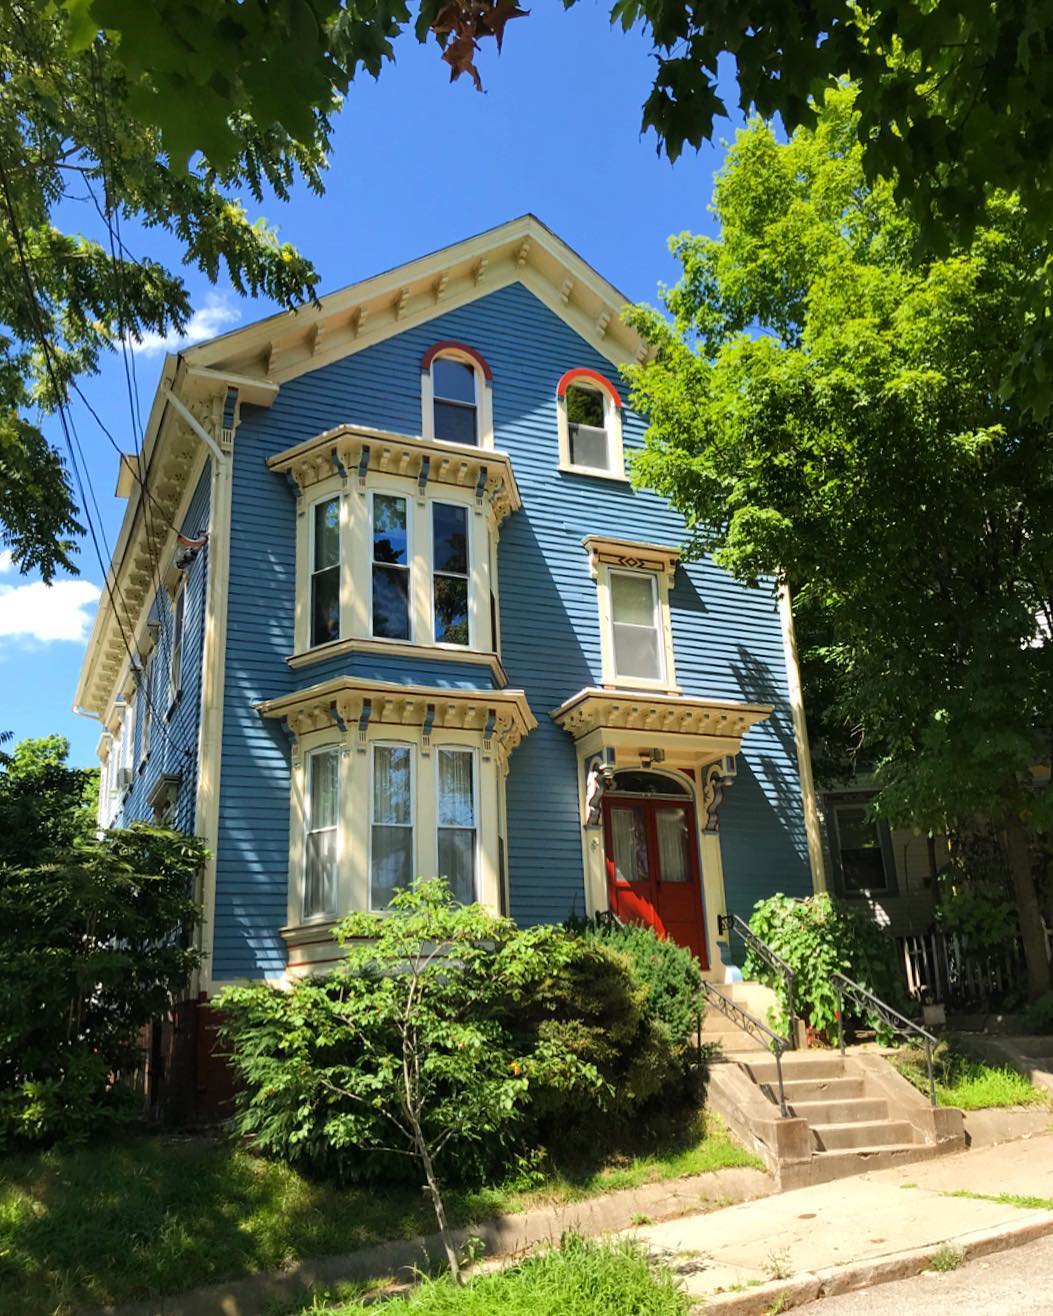 Old Victorian Style Home in Mount Hope, Providence. Photo by Instagram user @seaofsteps